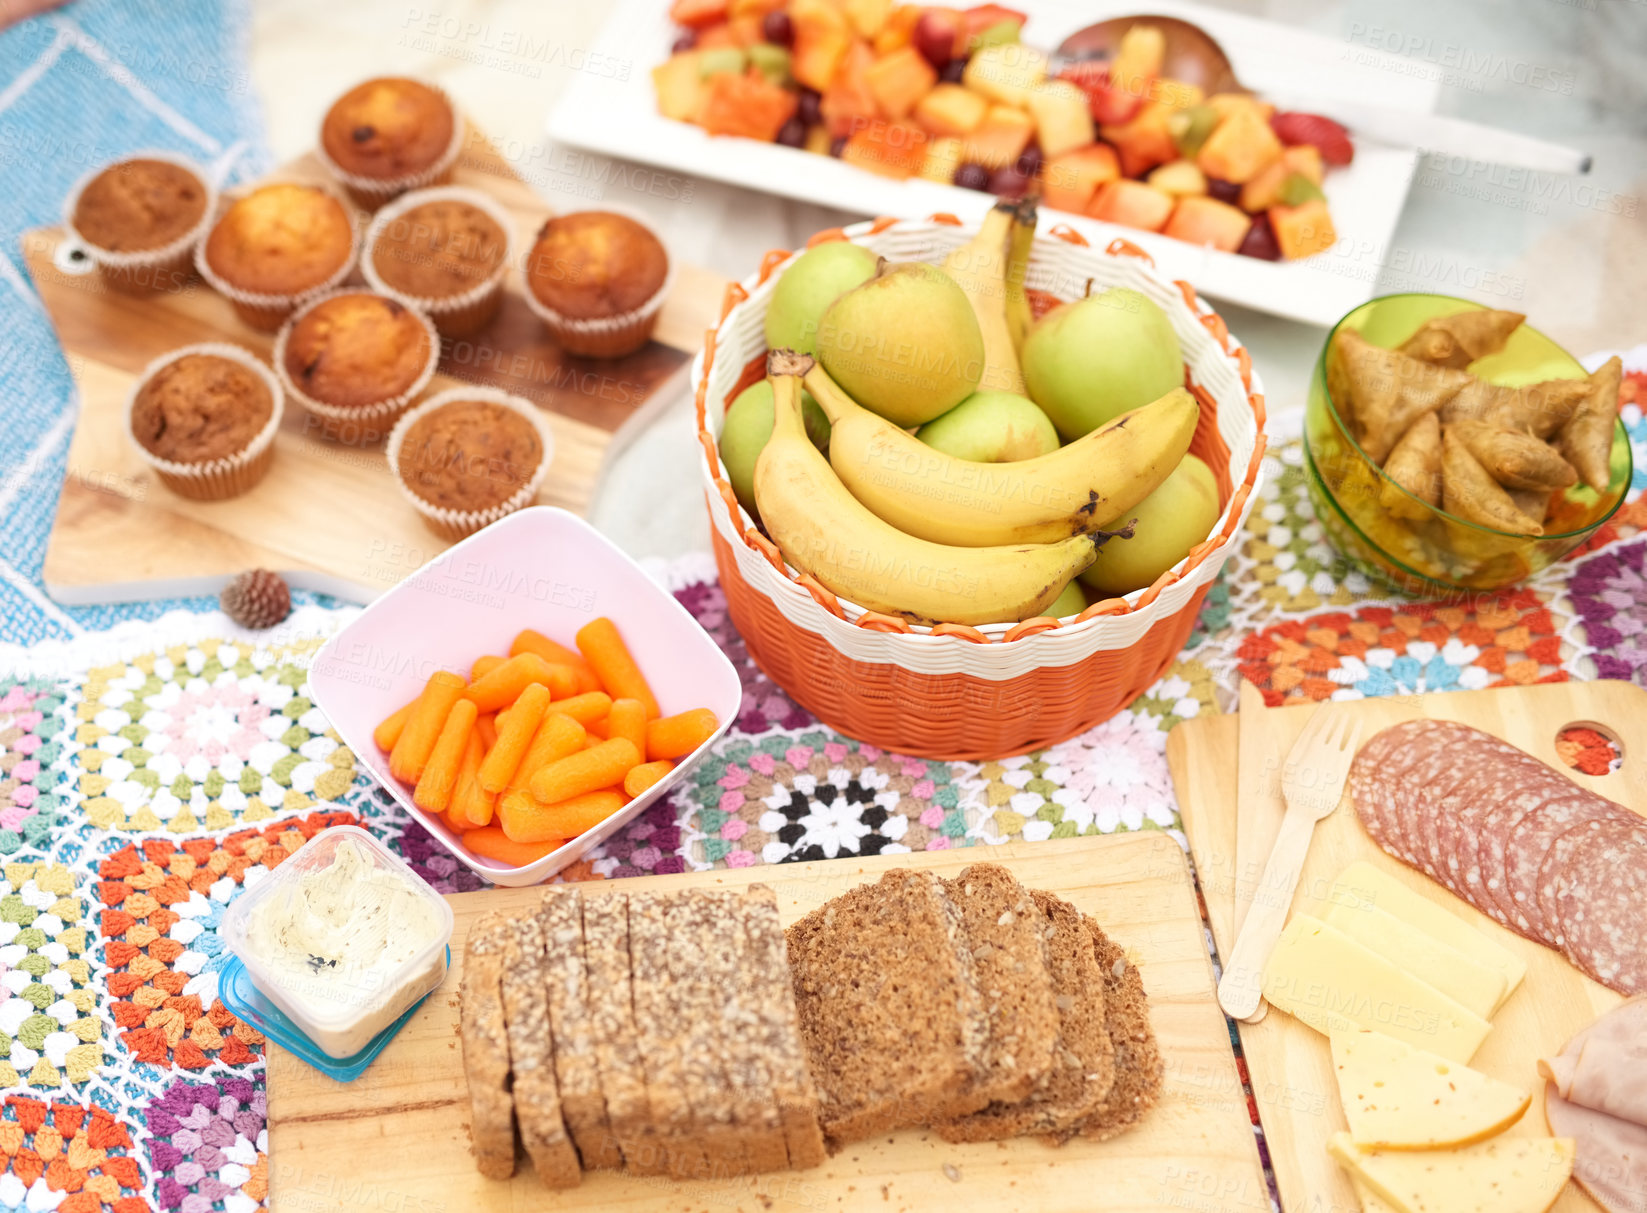 Buy stock photo Shot of a spread of different types of snacks placed together on a picnic blanket outside during the day